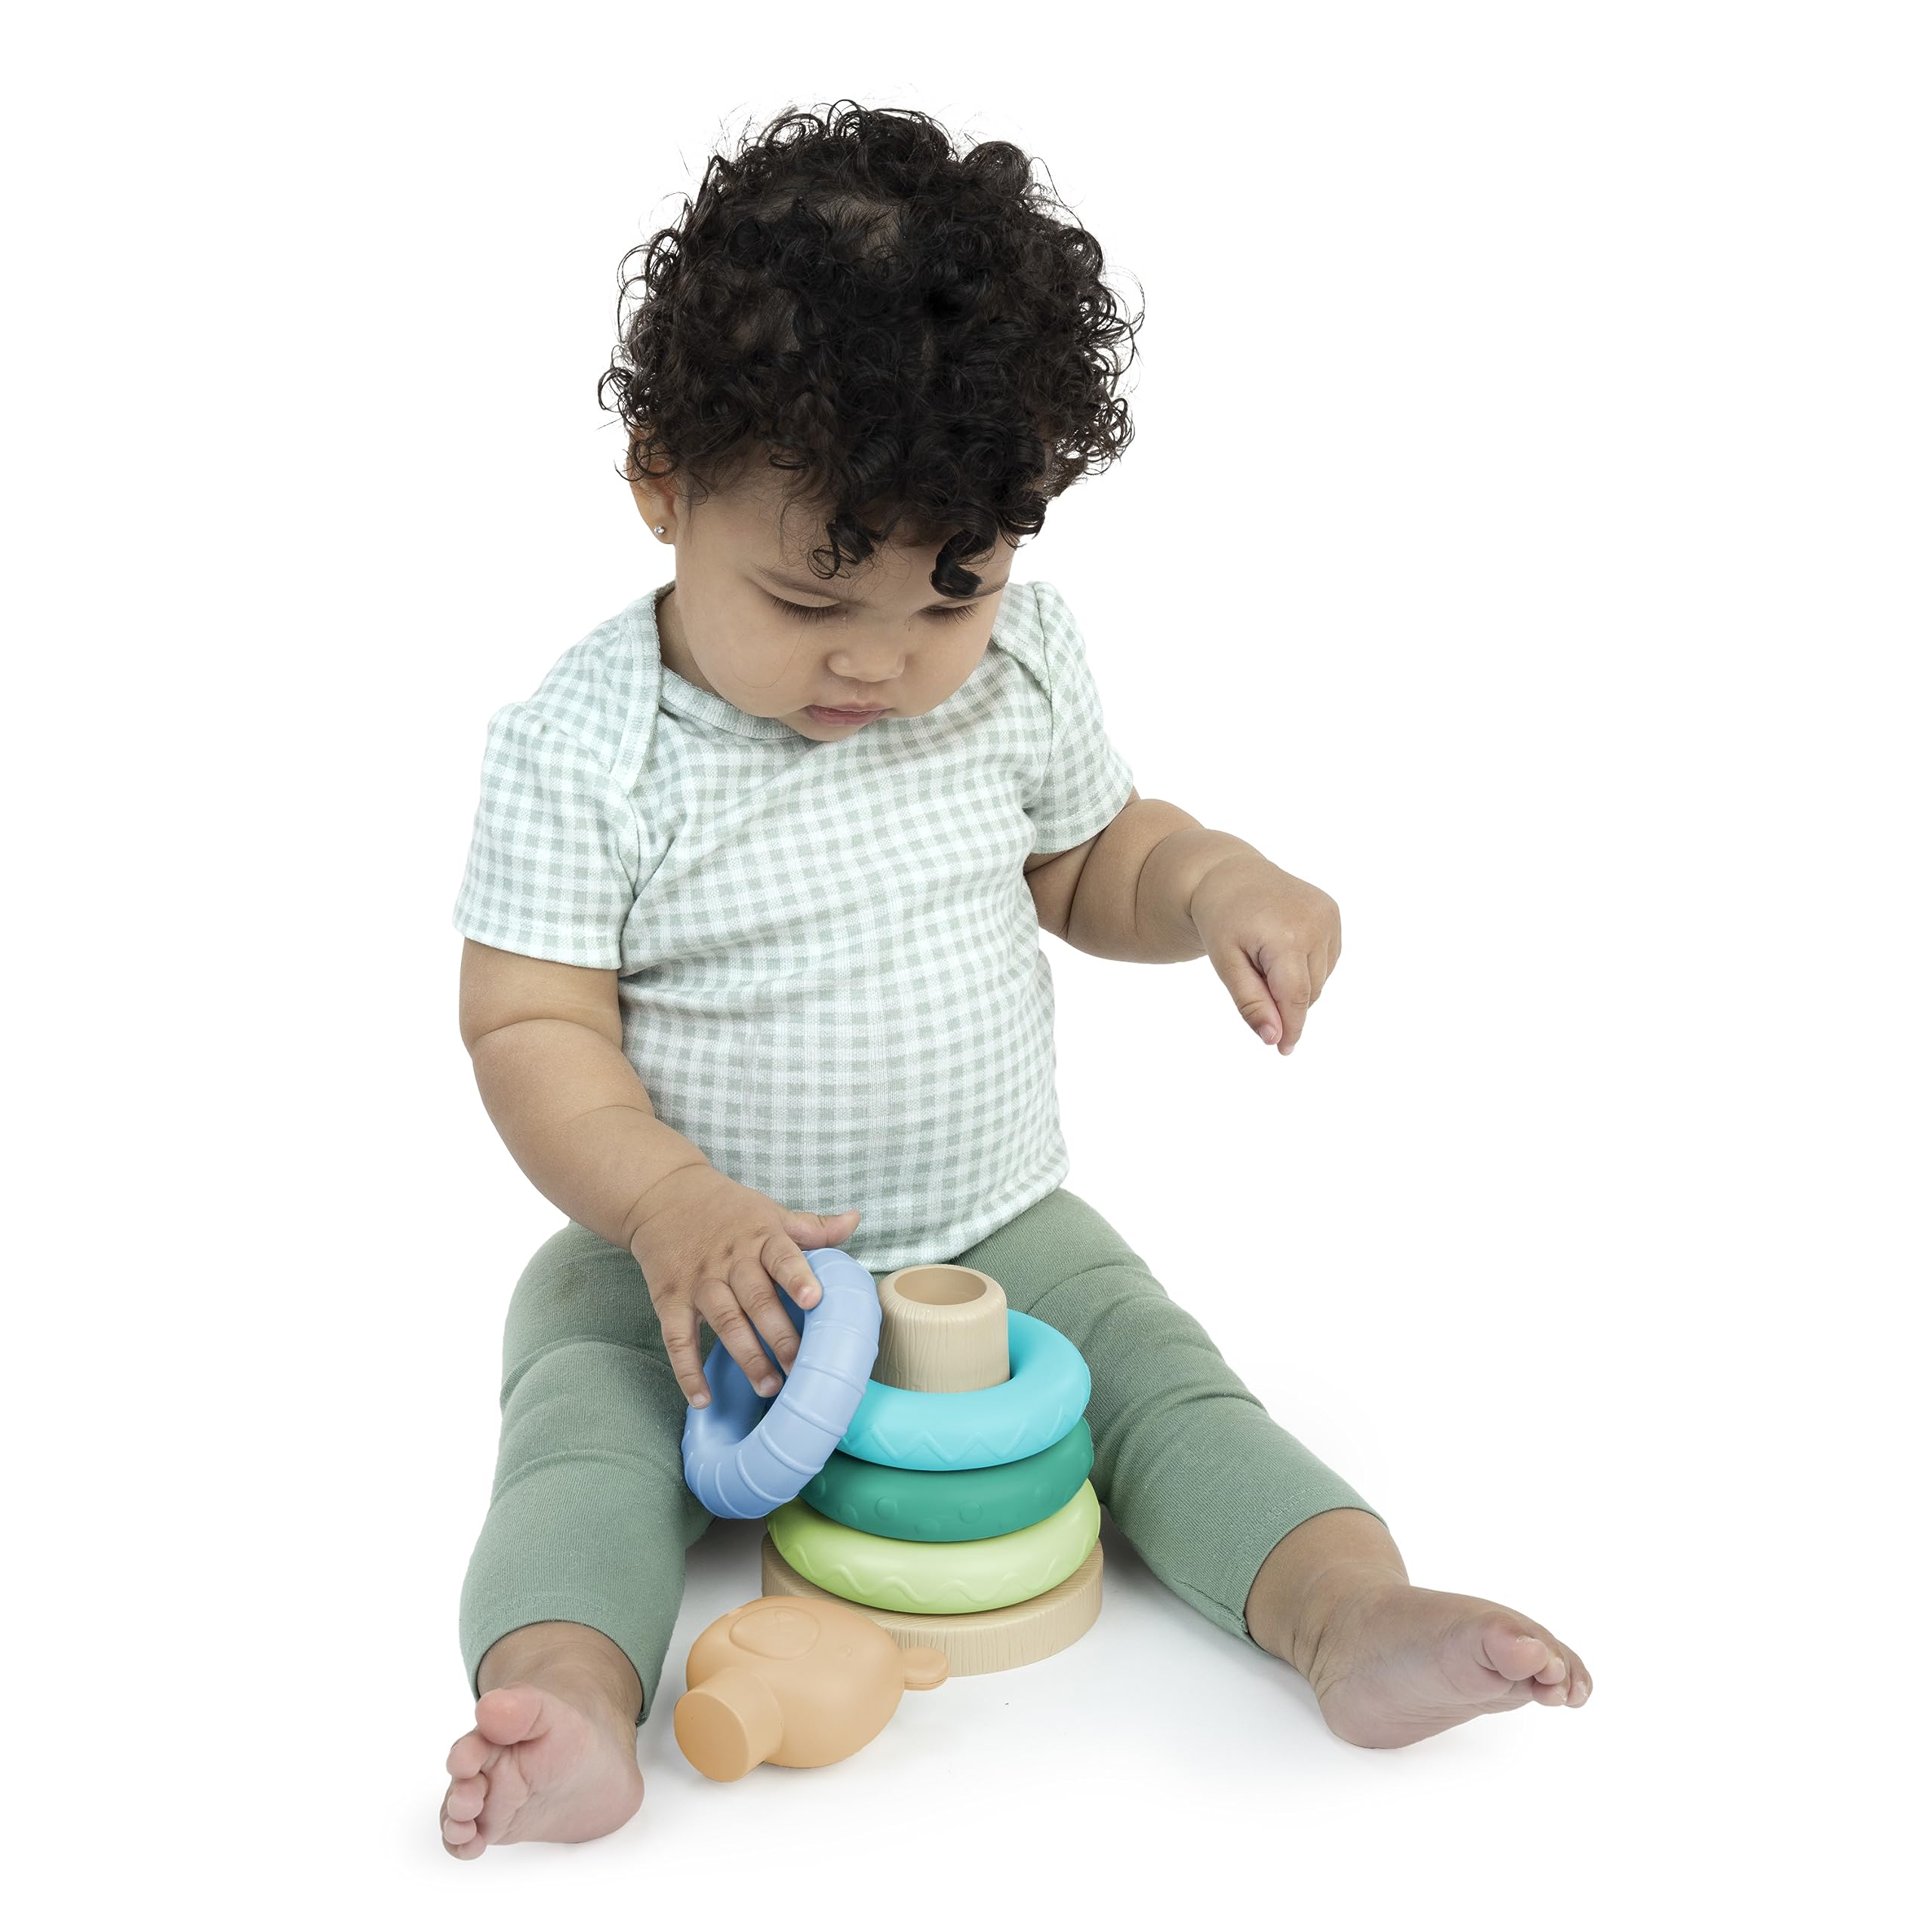 ity by Ingenuity Cutie Stacks, 4 BPA-Free Rings, Faux Wood Stand, Bear Topper, Unisex, for Ages 6 Months and Up - Nate